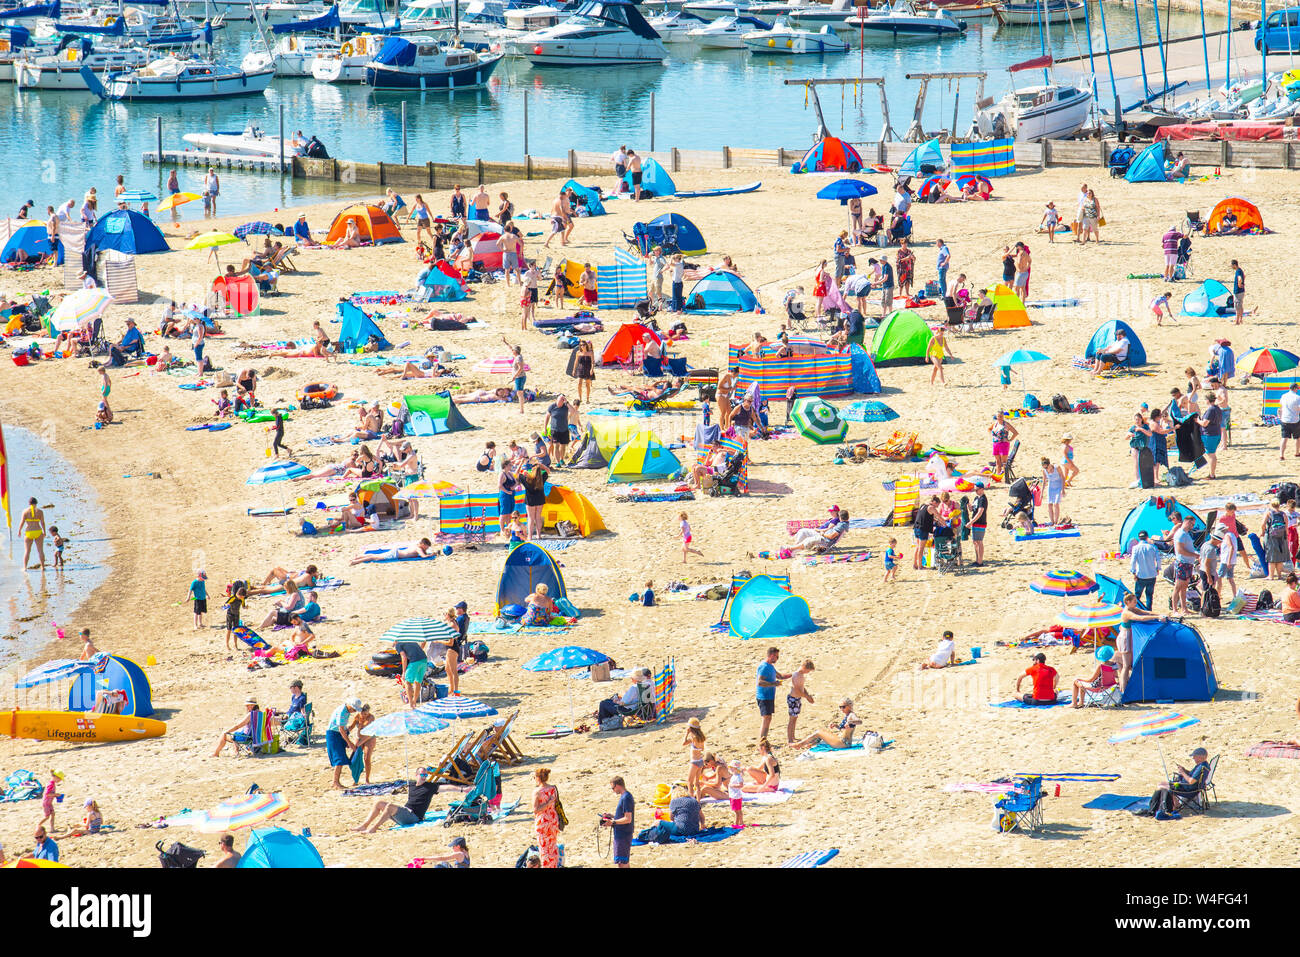 Lyme Regis, Dorset, UK. 23rd July 2019. UK Weather: Sunseekers flock to the picturesque seaside resort of Lyme Regis to soak up the scorching hot sunshine and on the first week of the school summer holidays.  Holidaymakers and families swelter in the hot sunshine on the town's packed beach while others take a cooling dip in the sea on what is set to be the hottest week of the year so far as the African Plume hits southern Britain. Credit: Celia McMahon/Alamy Live News. Stock Photo